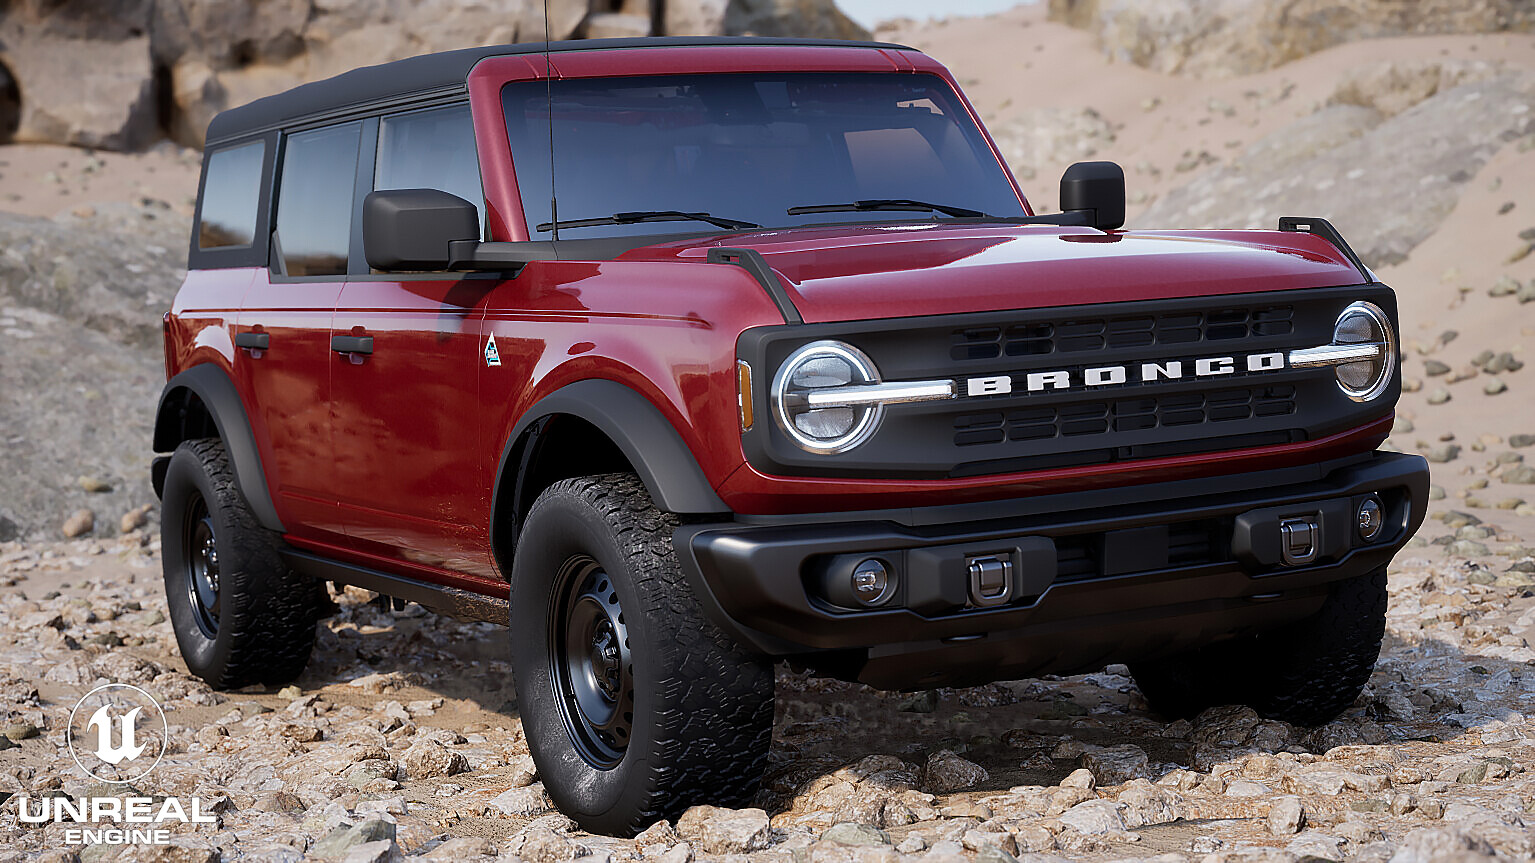 Ford Bronco UE4 Feature Images